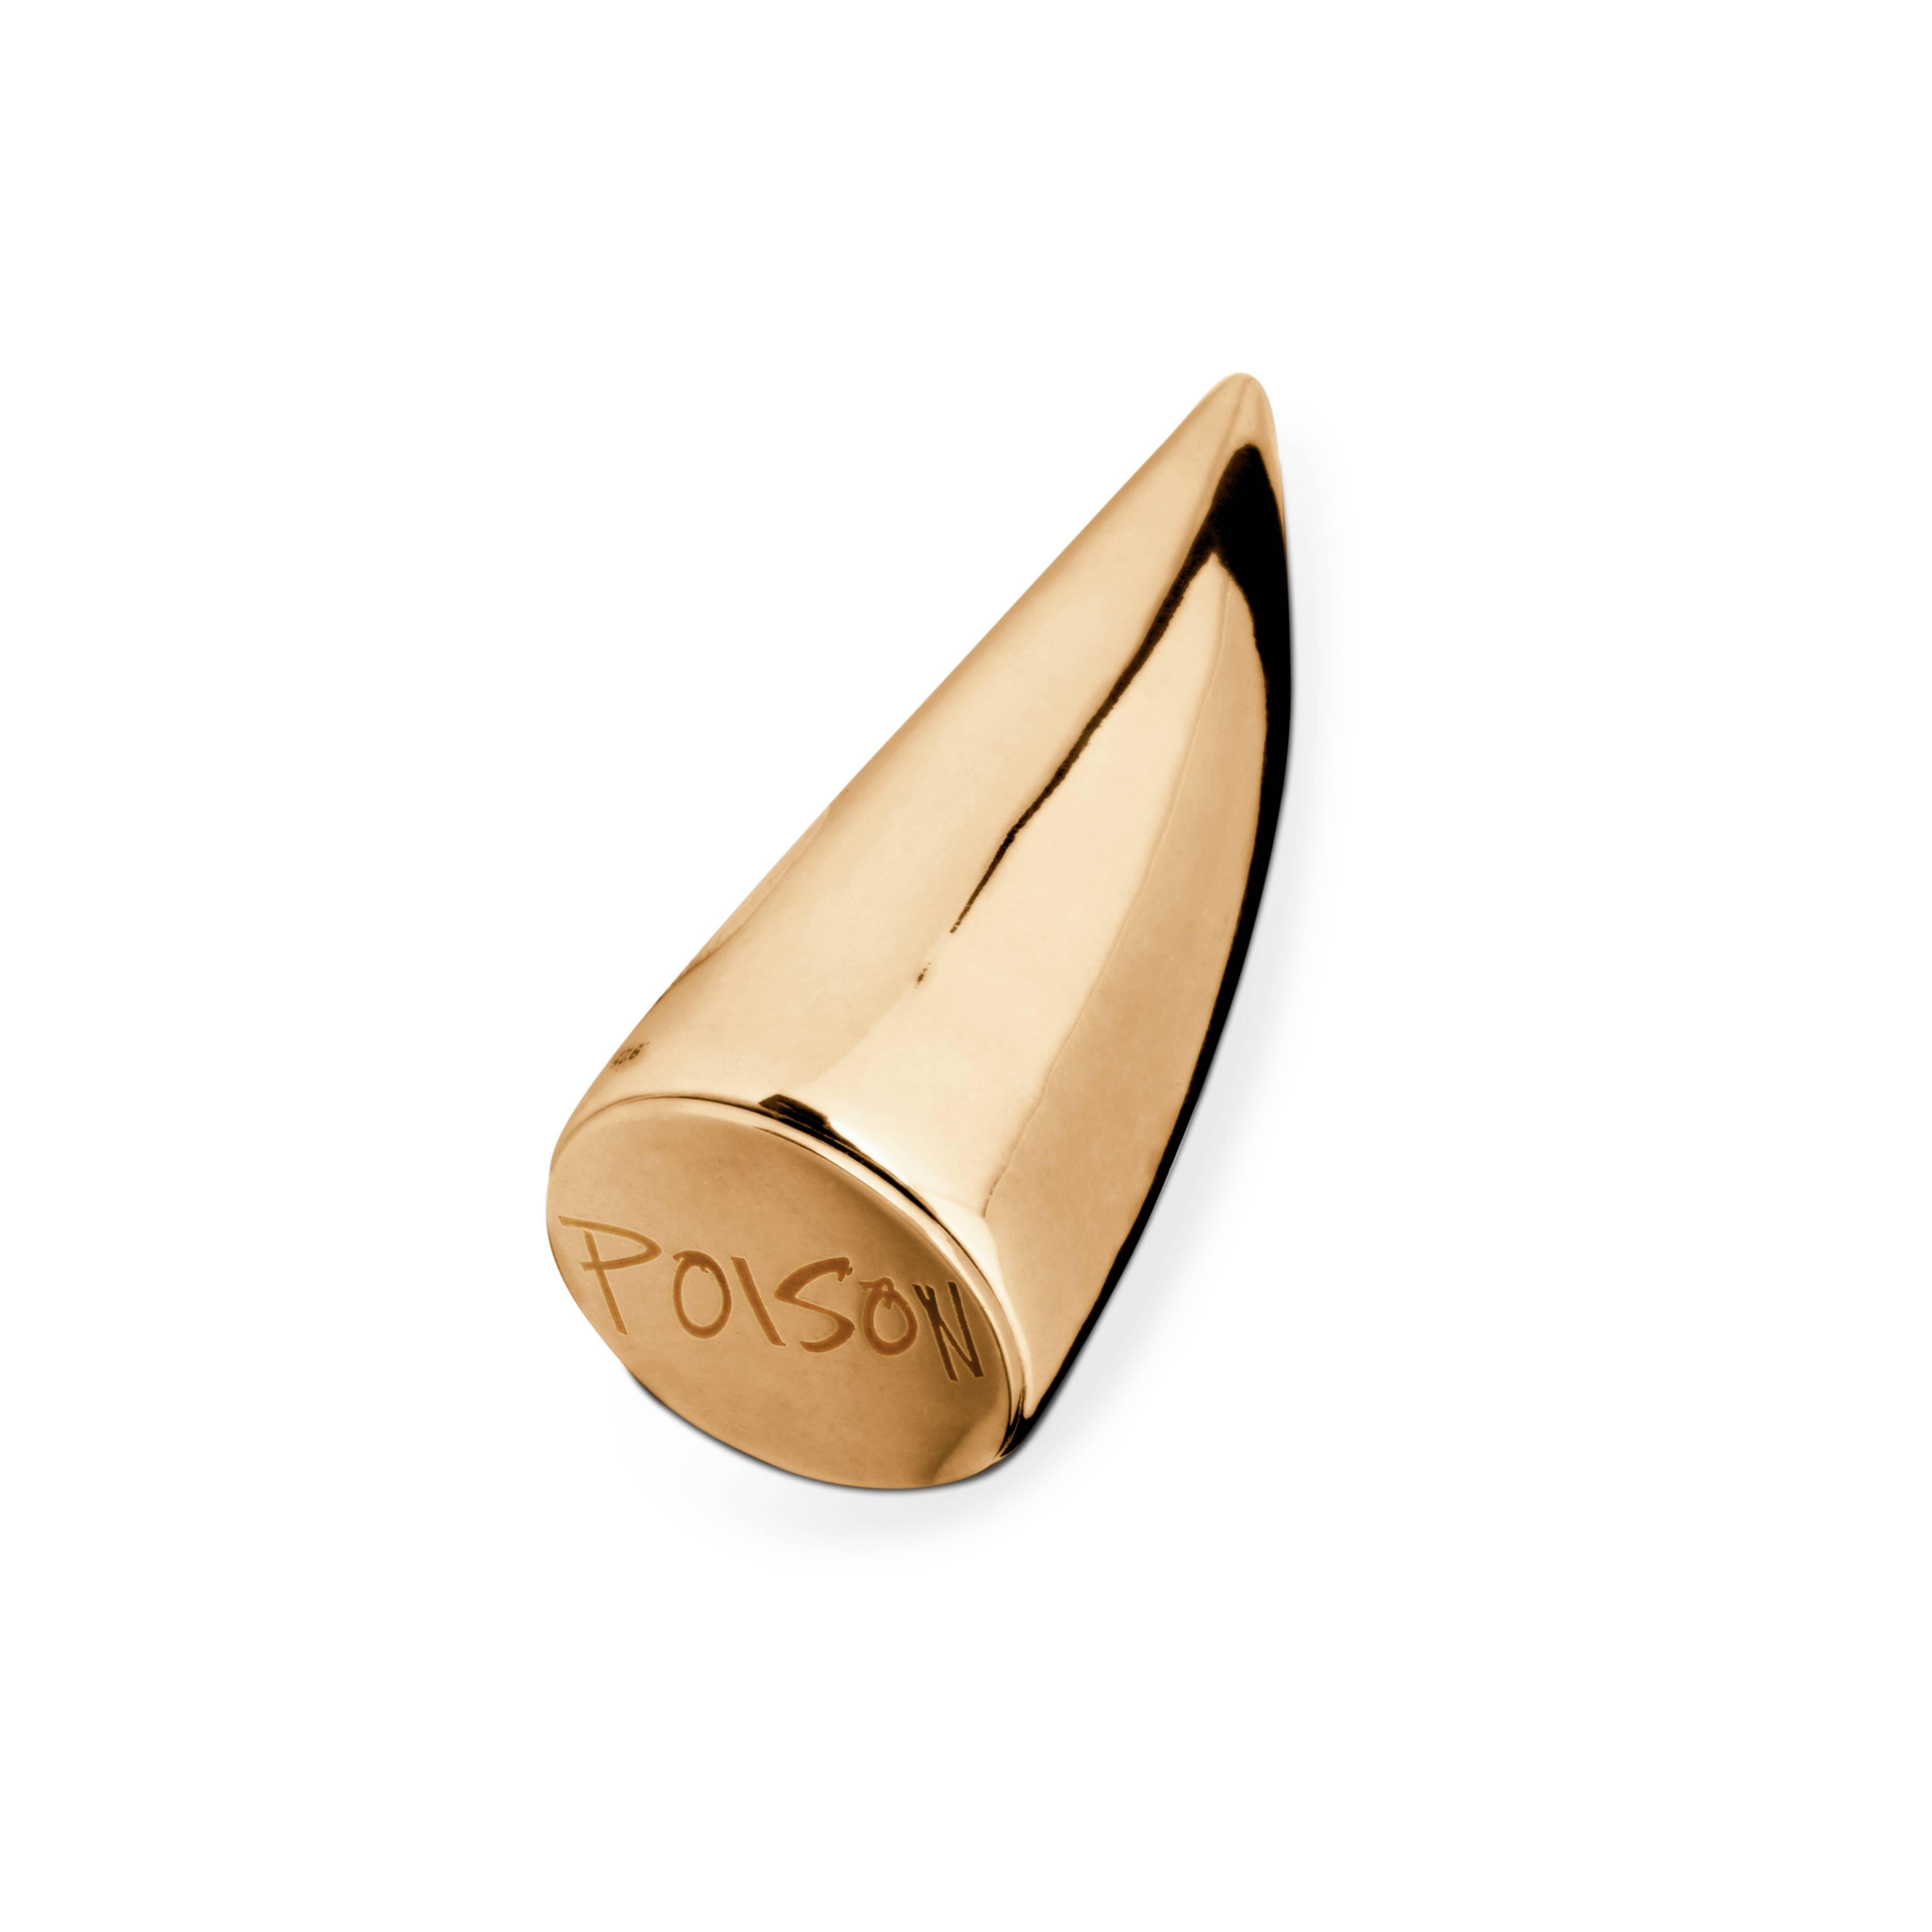 This toggle-shaped pill case in solid 14k solid gold features sinuous curved lines and provides an elegant and stylish way to carry your medicine with you. Choose from our standard Antidote or Poison engraved screw cap lid. 

Crafted in New York